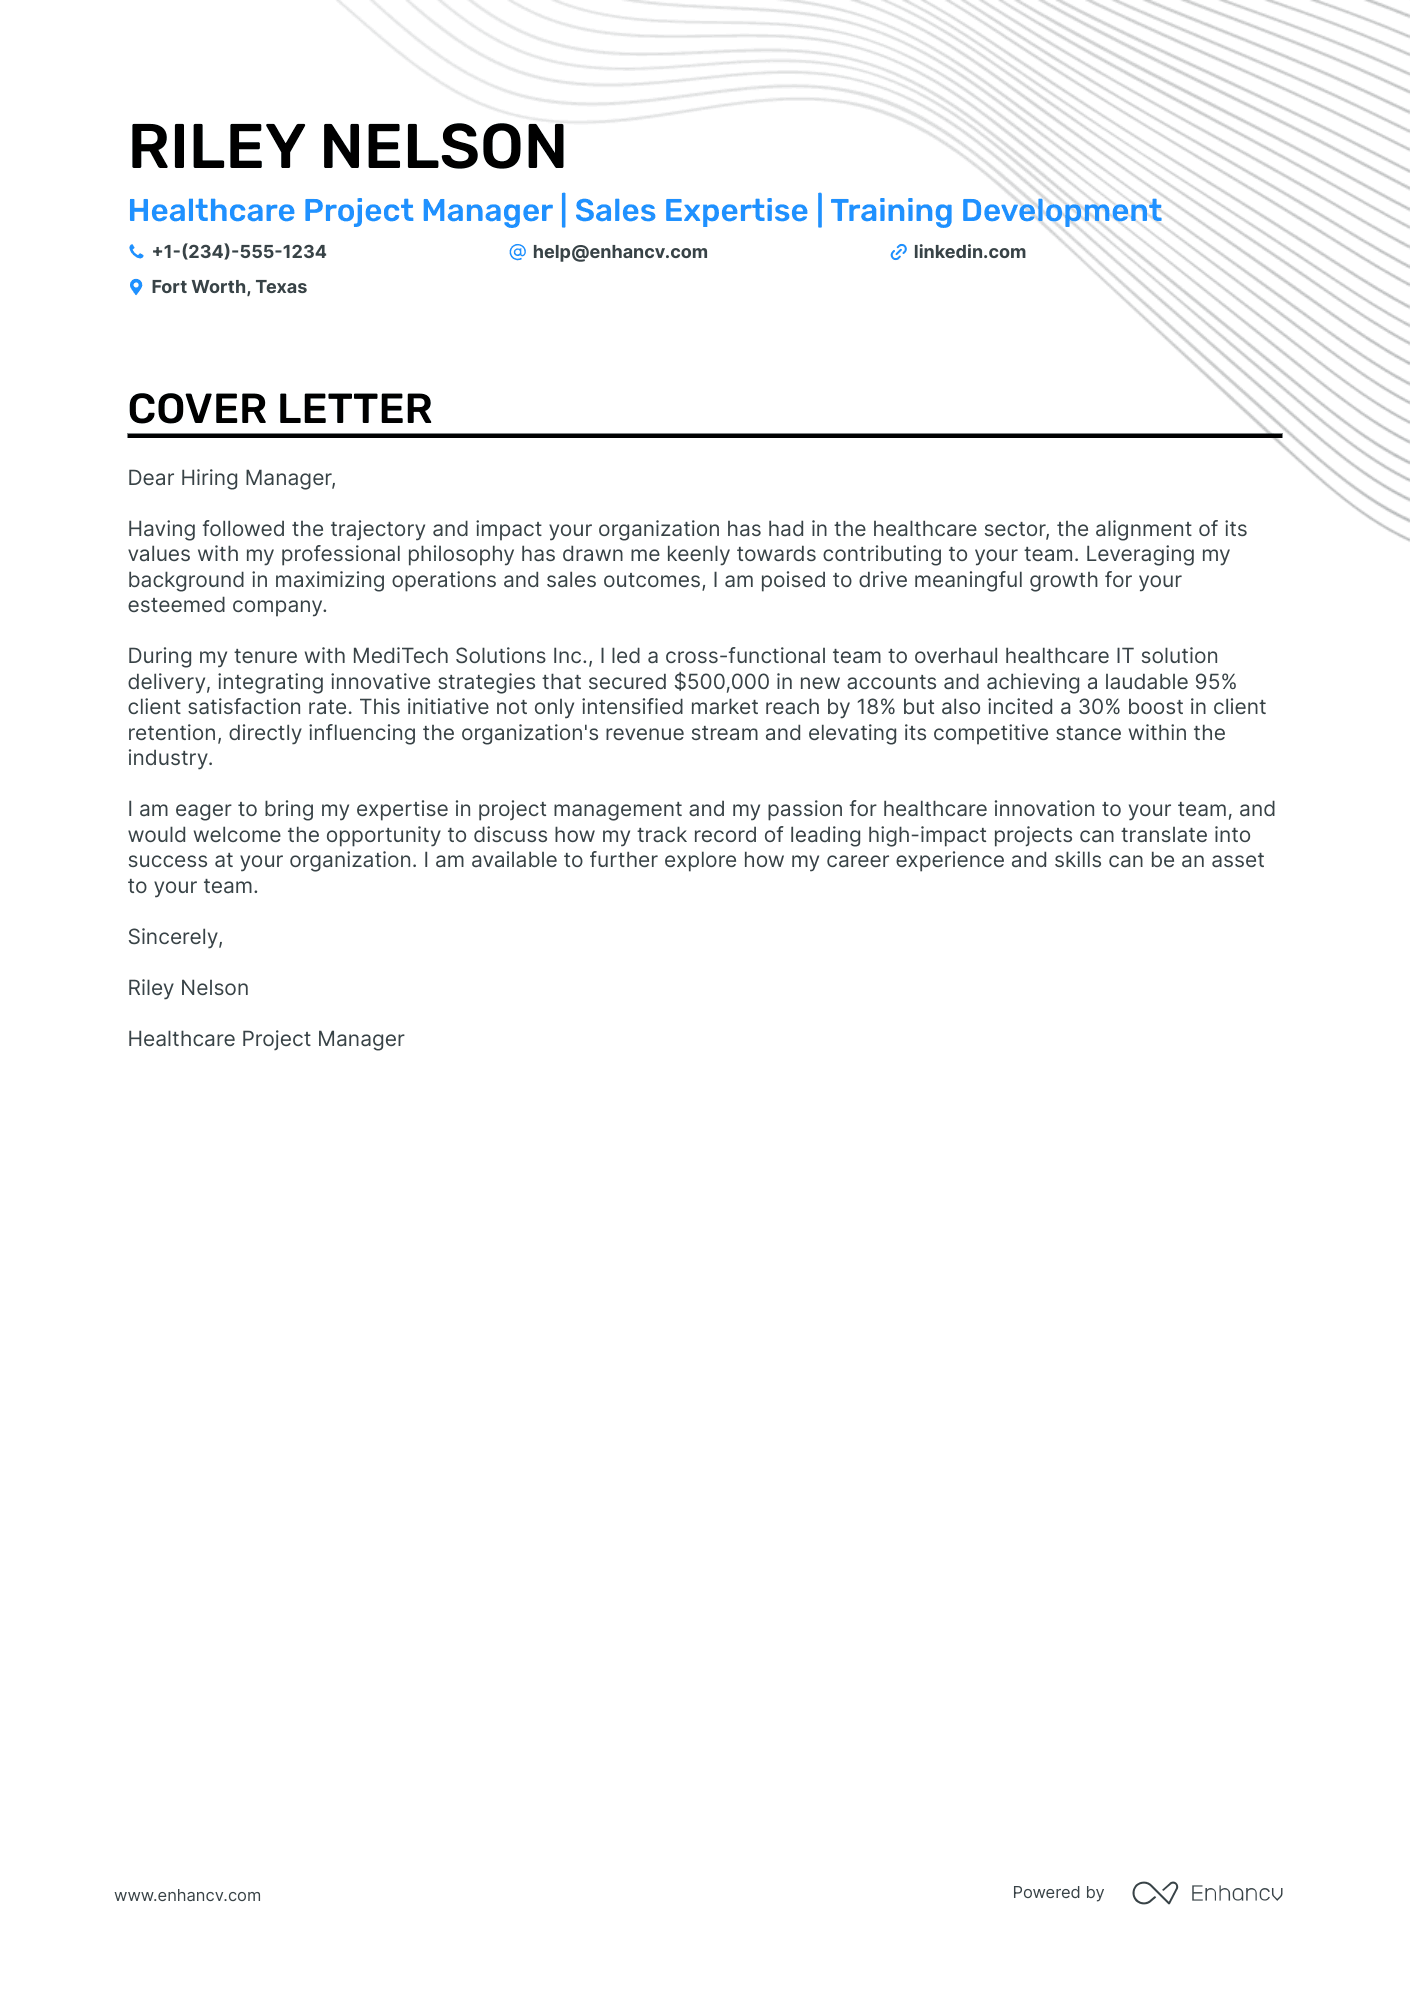 Healthcare Project Manager cover letter